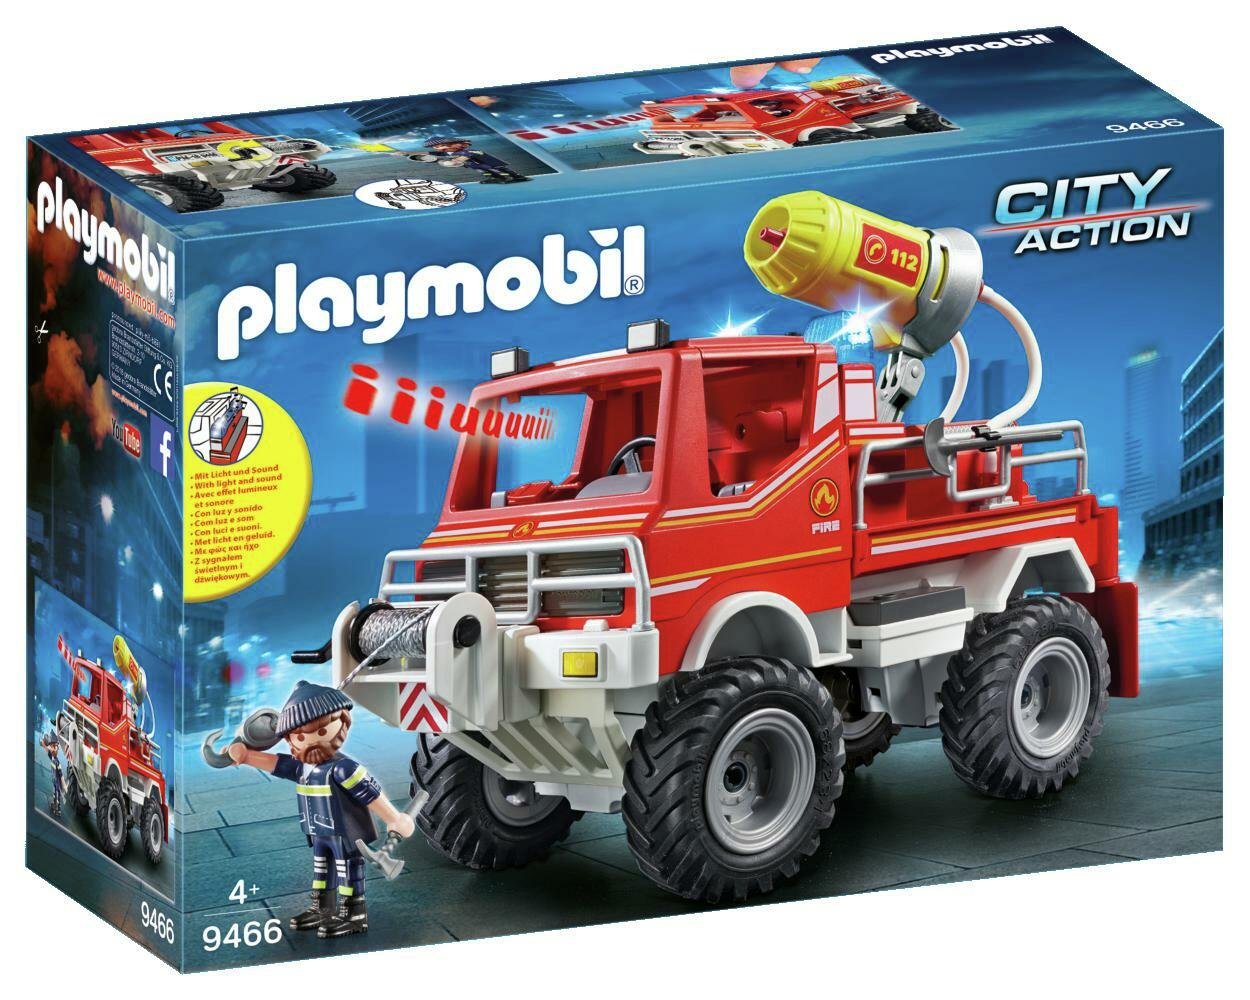 Playmobil 9466 City Action Fire Truck Review